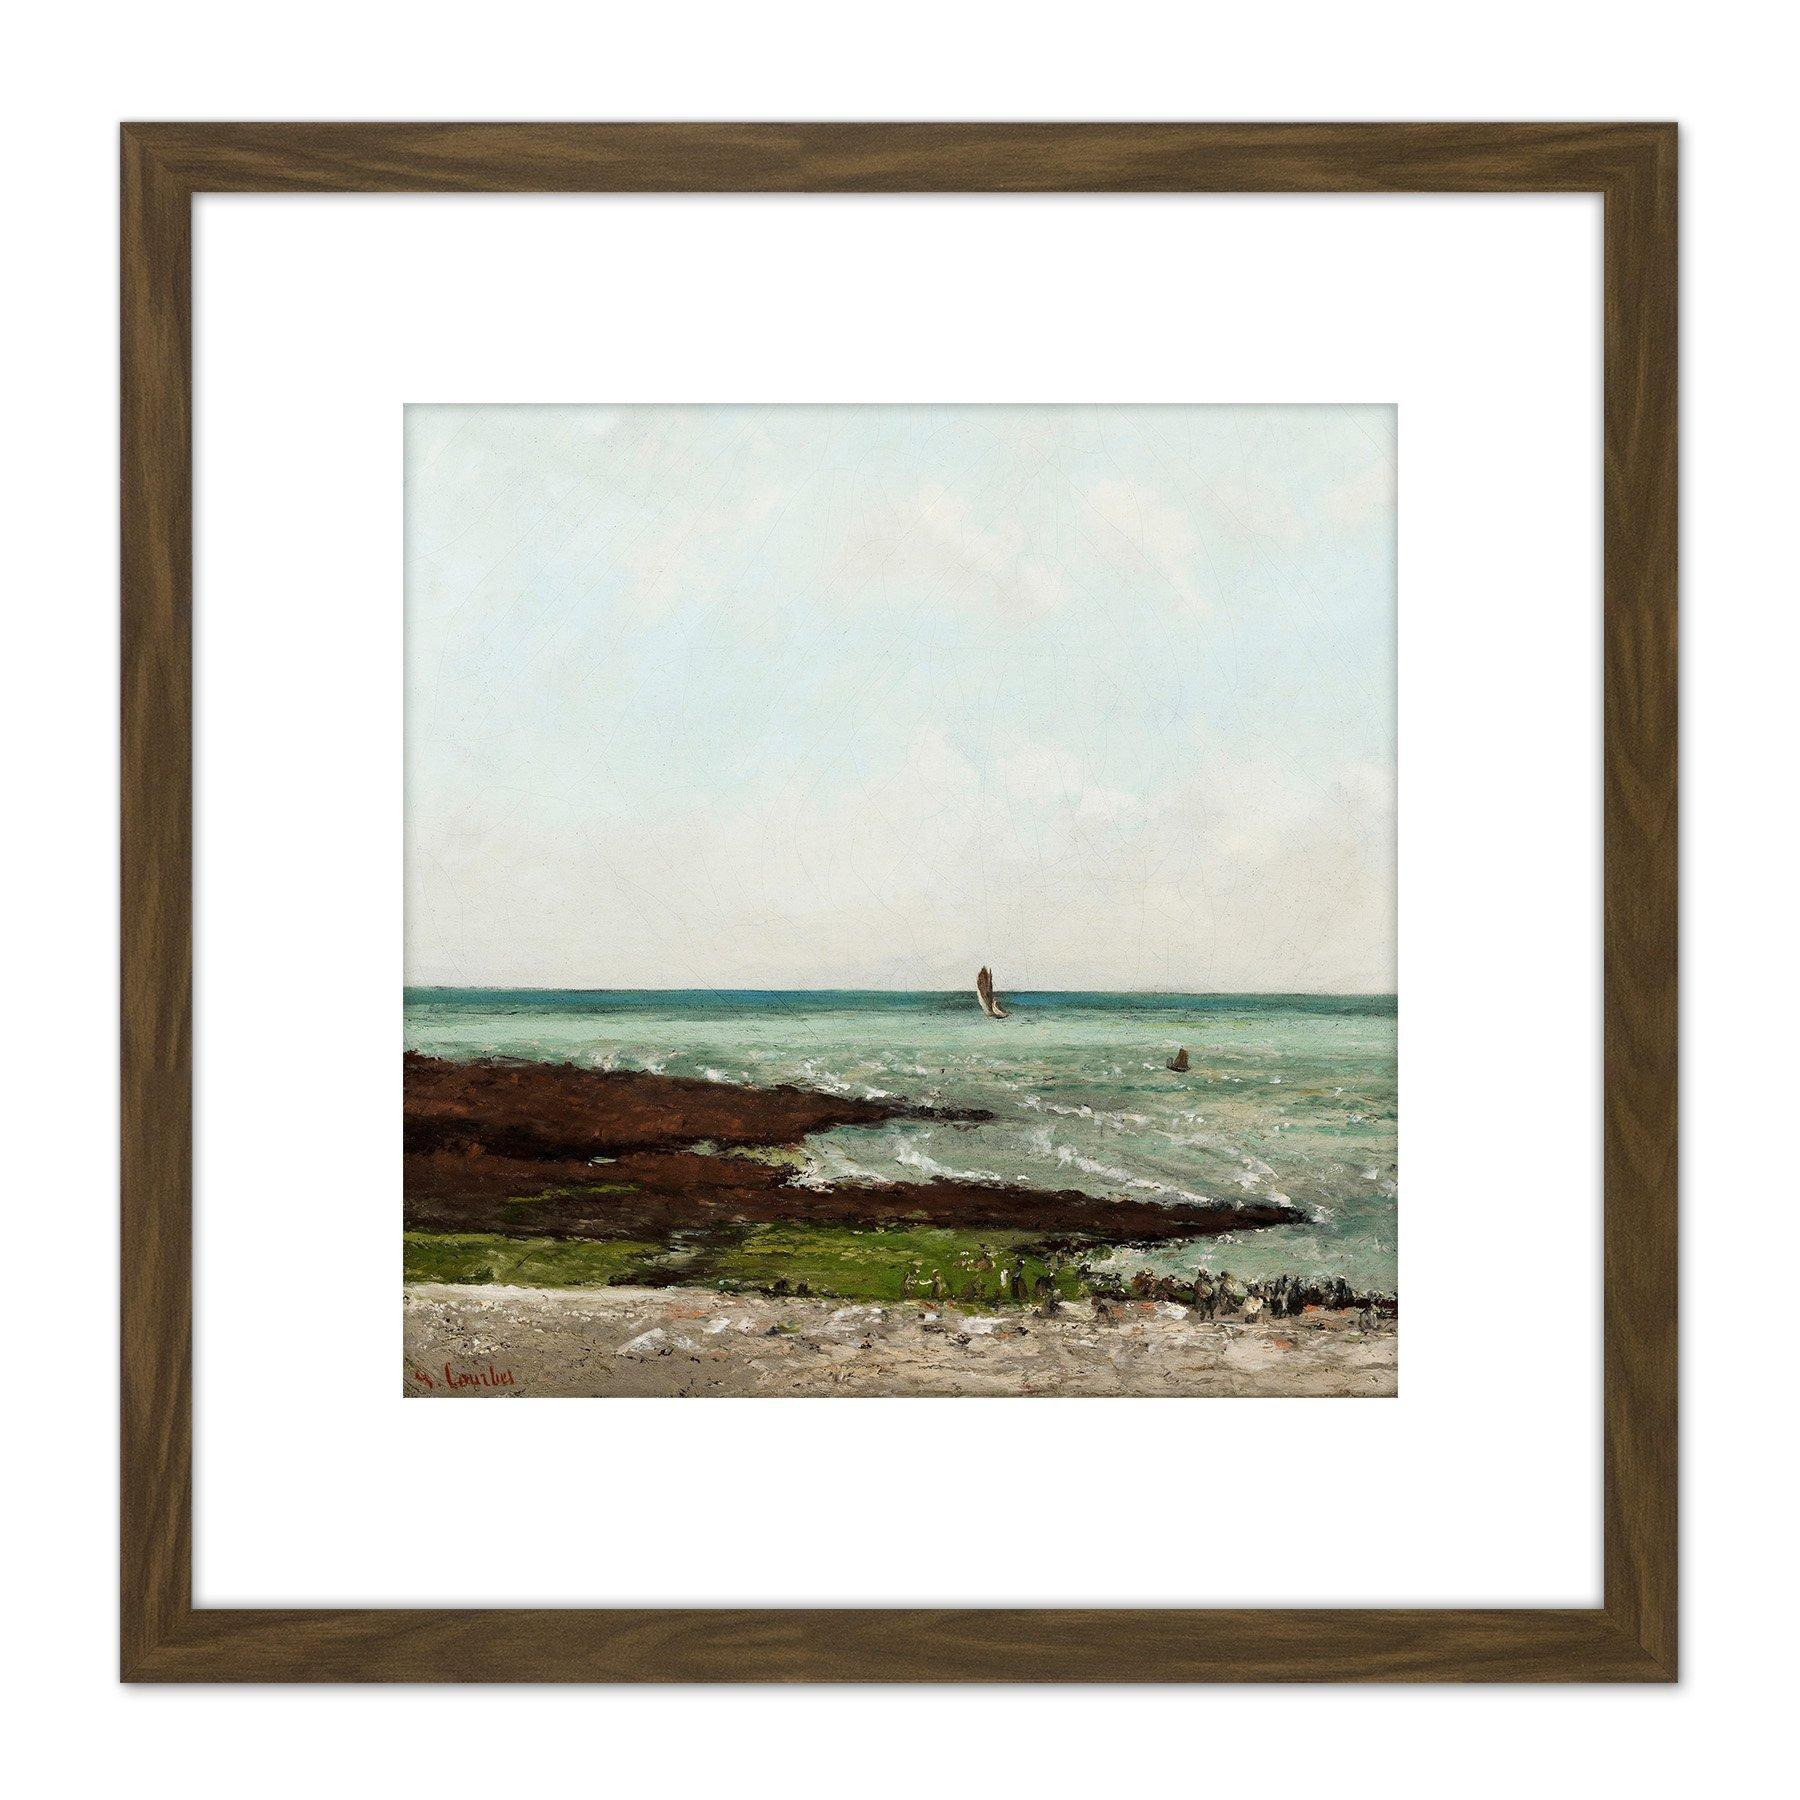 Courbet Laundresses At Low Tide Etretat Painting 8X8 Inch Square Wooden Framed Wall Art Print Picture with Mount - image 1